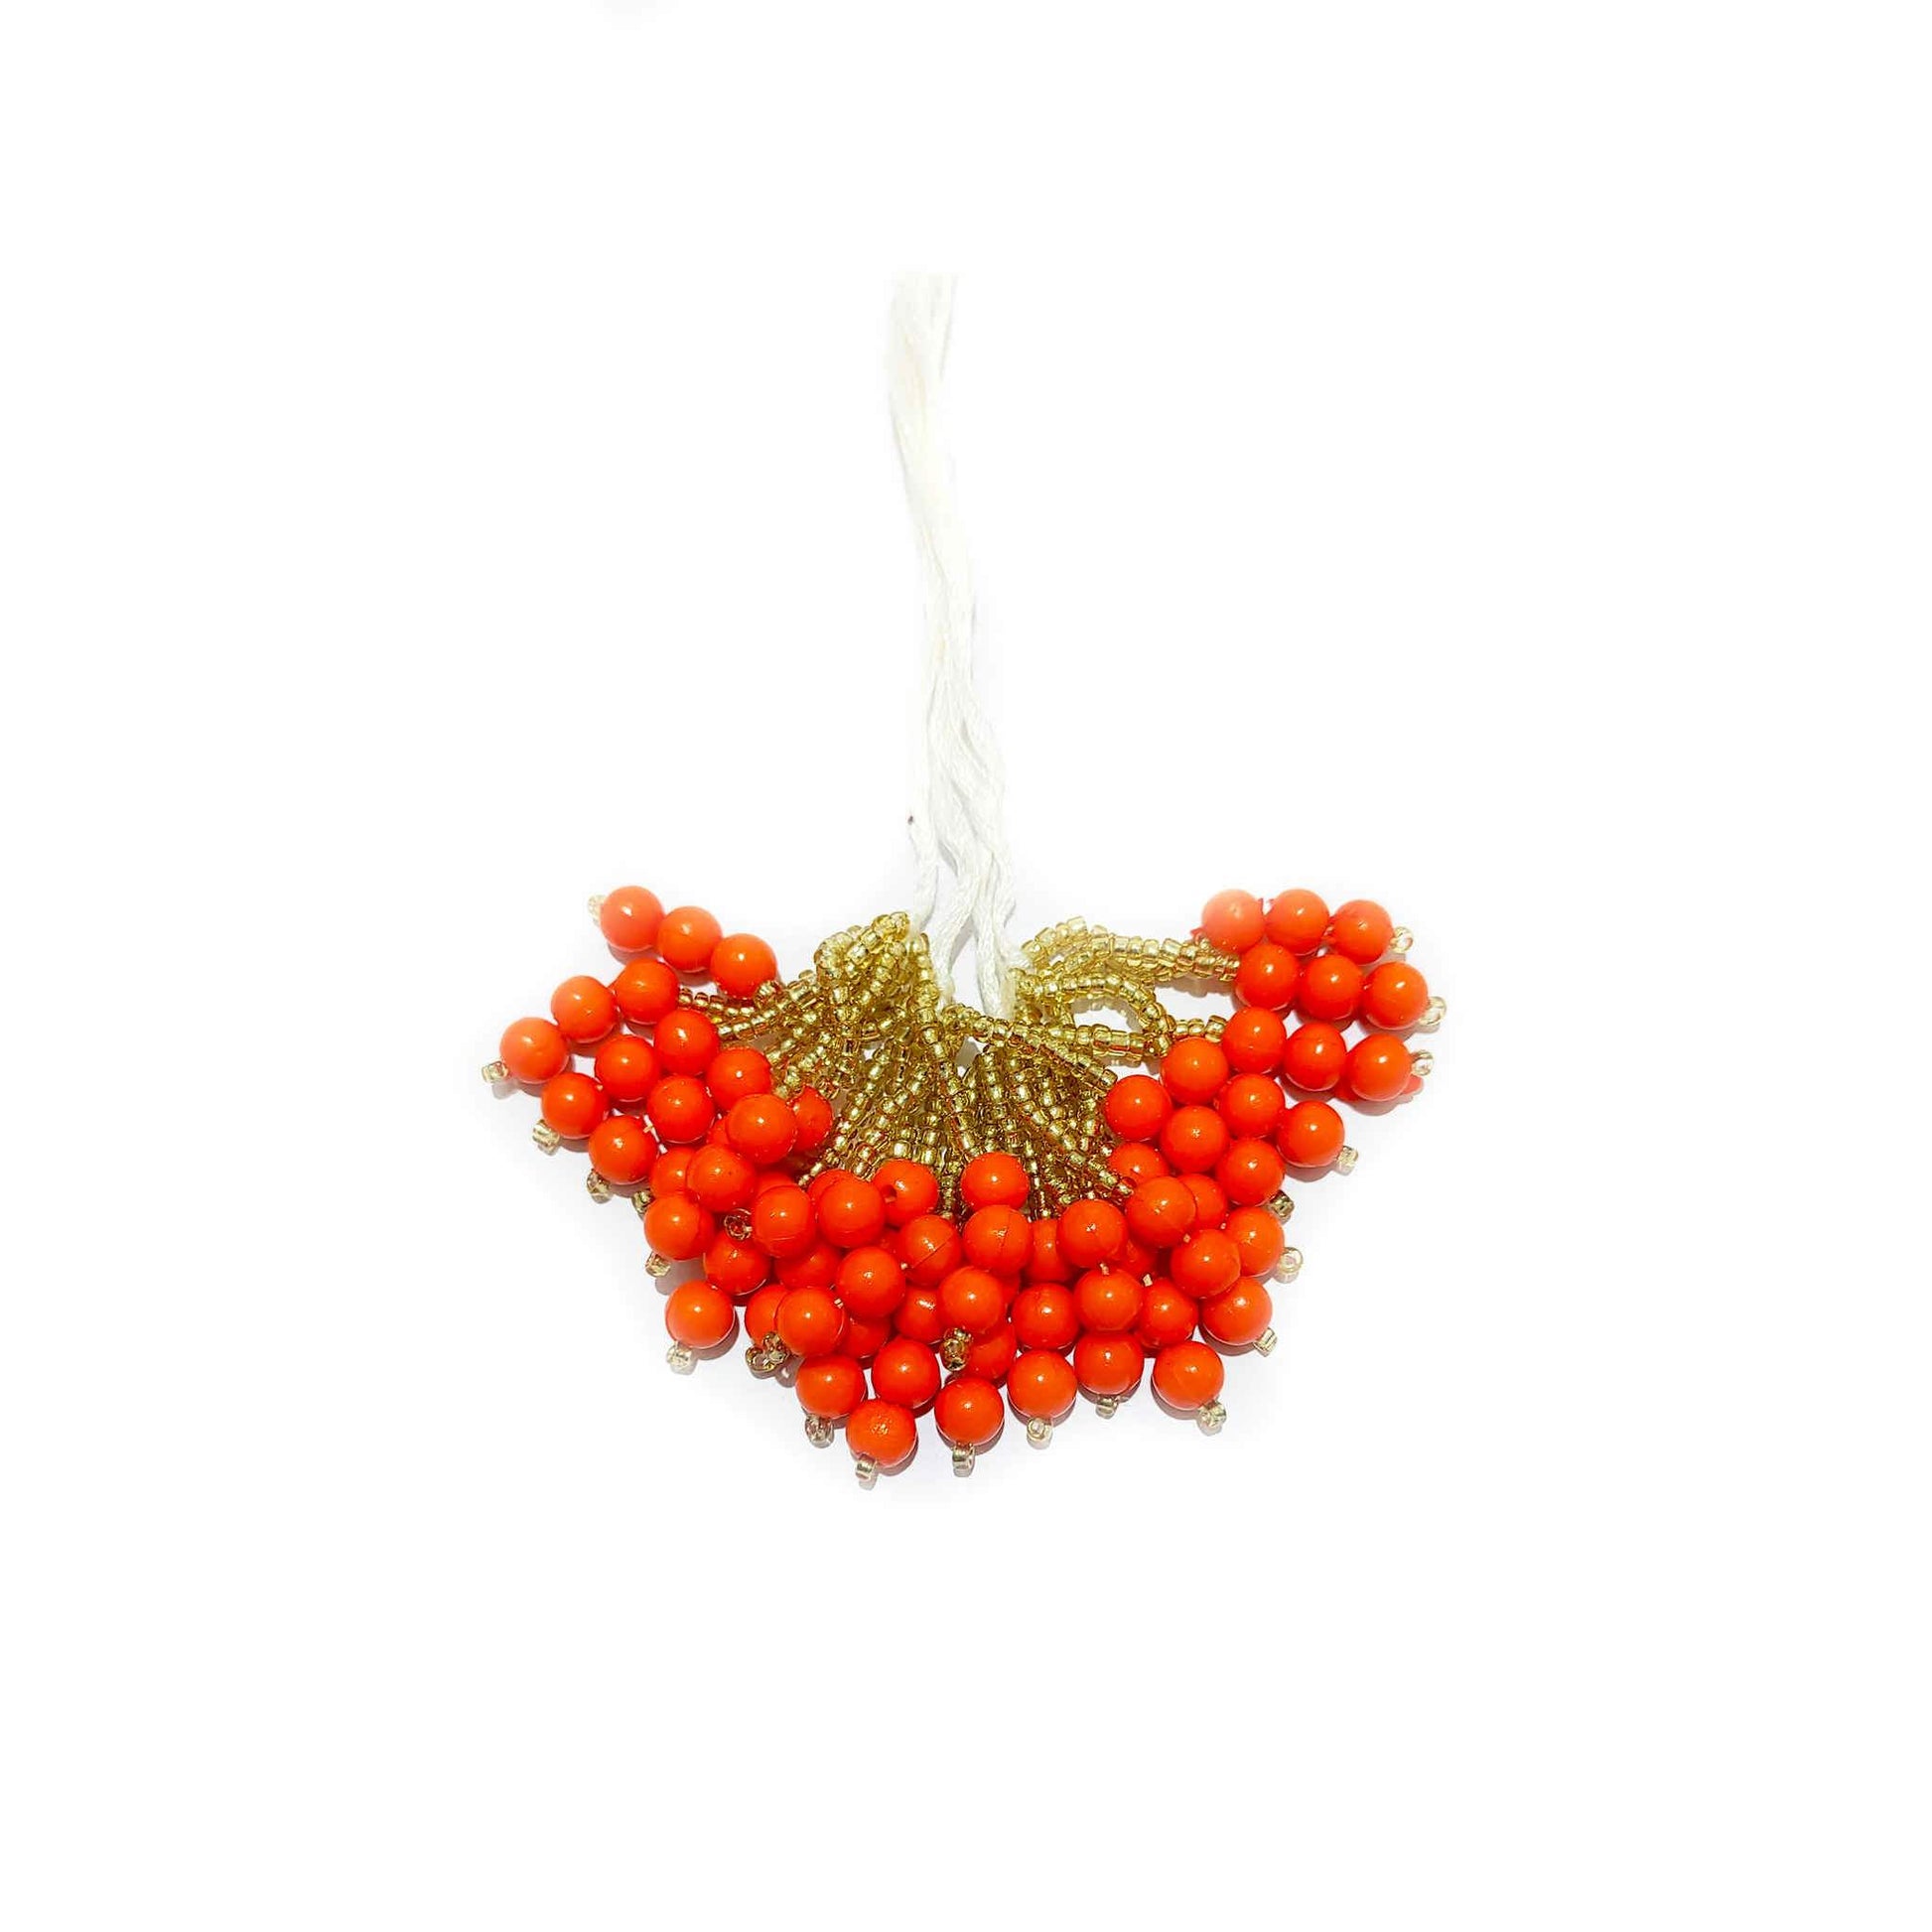 Indian Petals Handmade Beaded Thread Fringe Tassel with Cheed for Craft, Jewelry or Dressing - Design 845, Orange